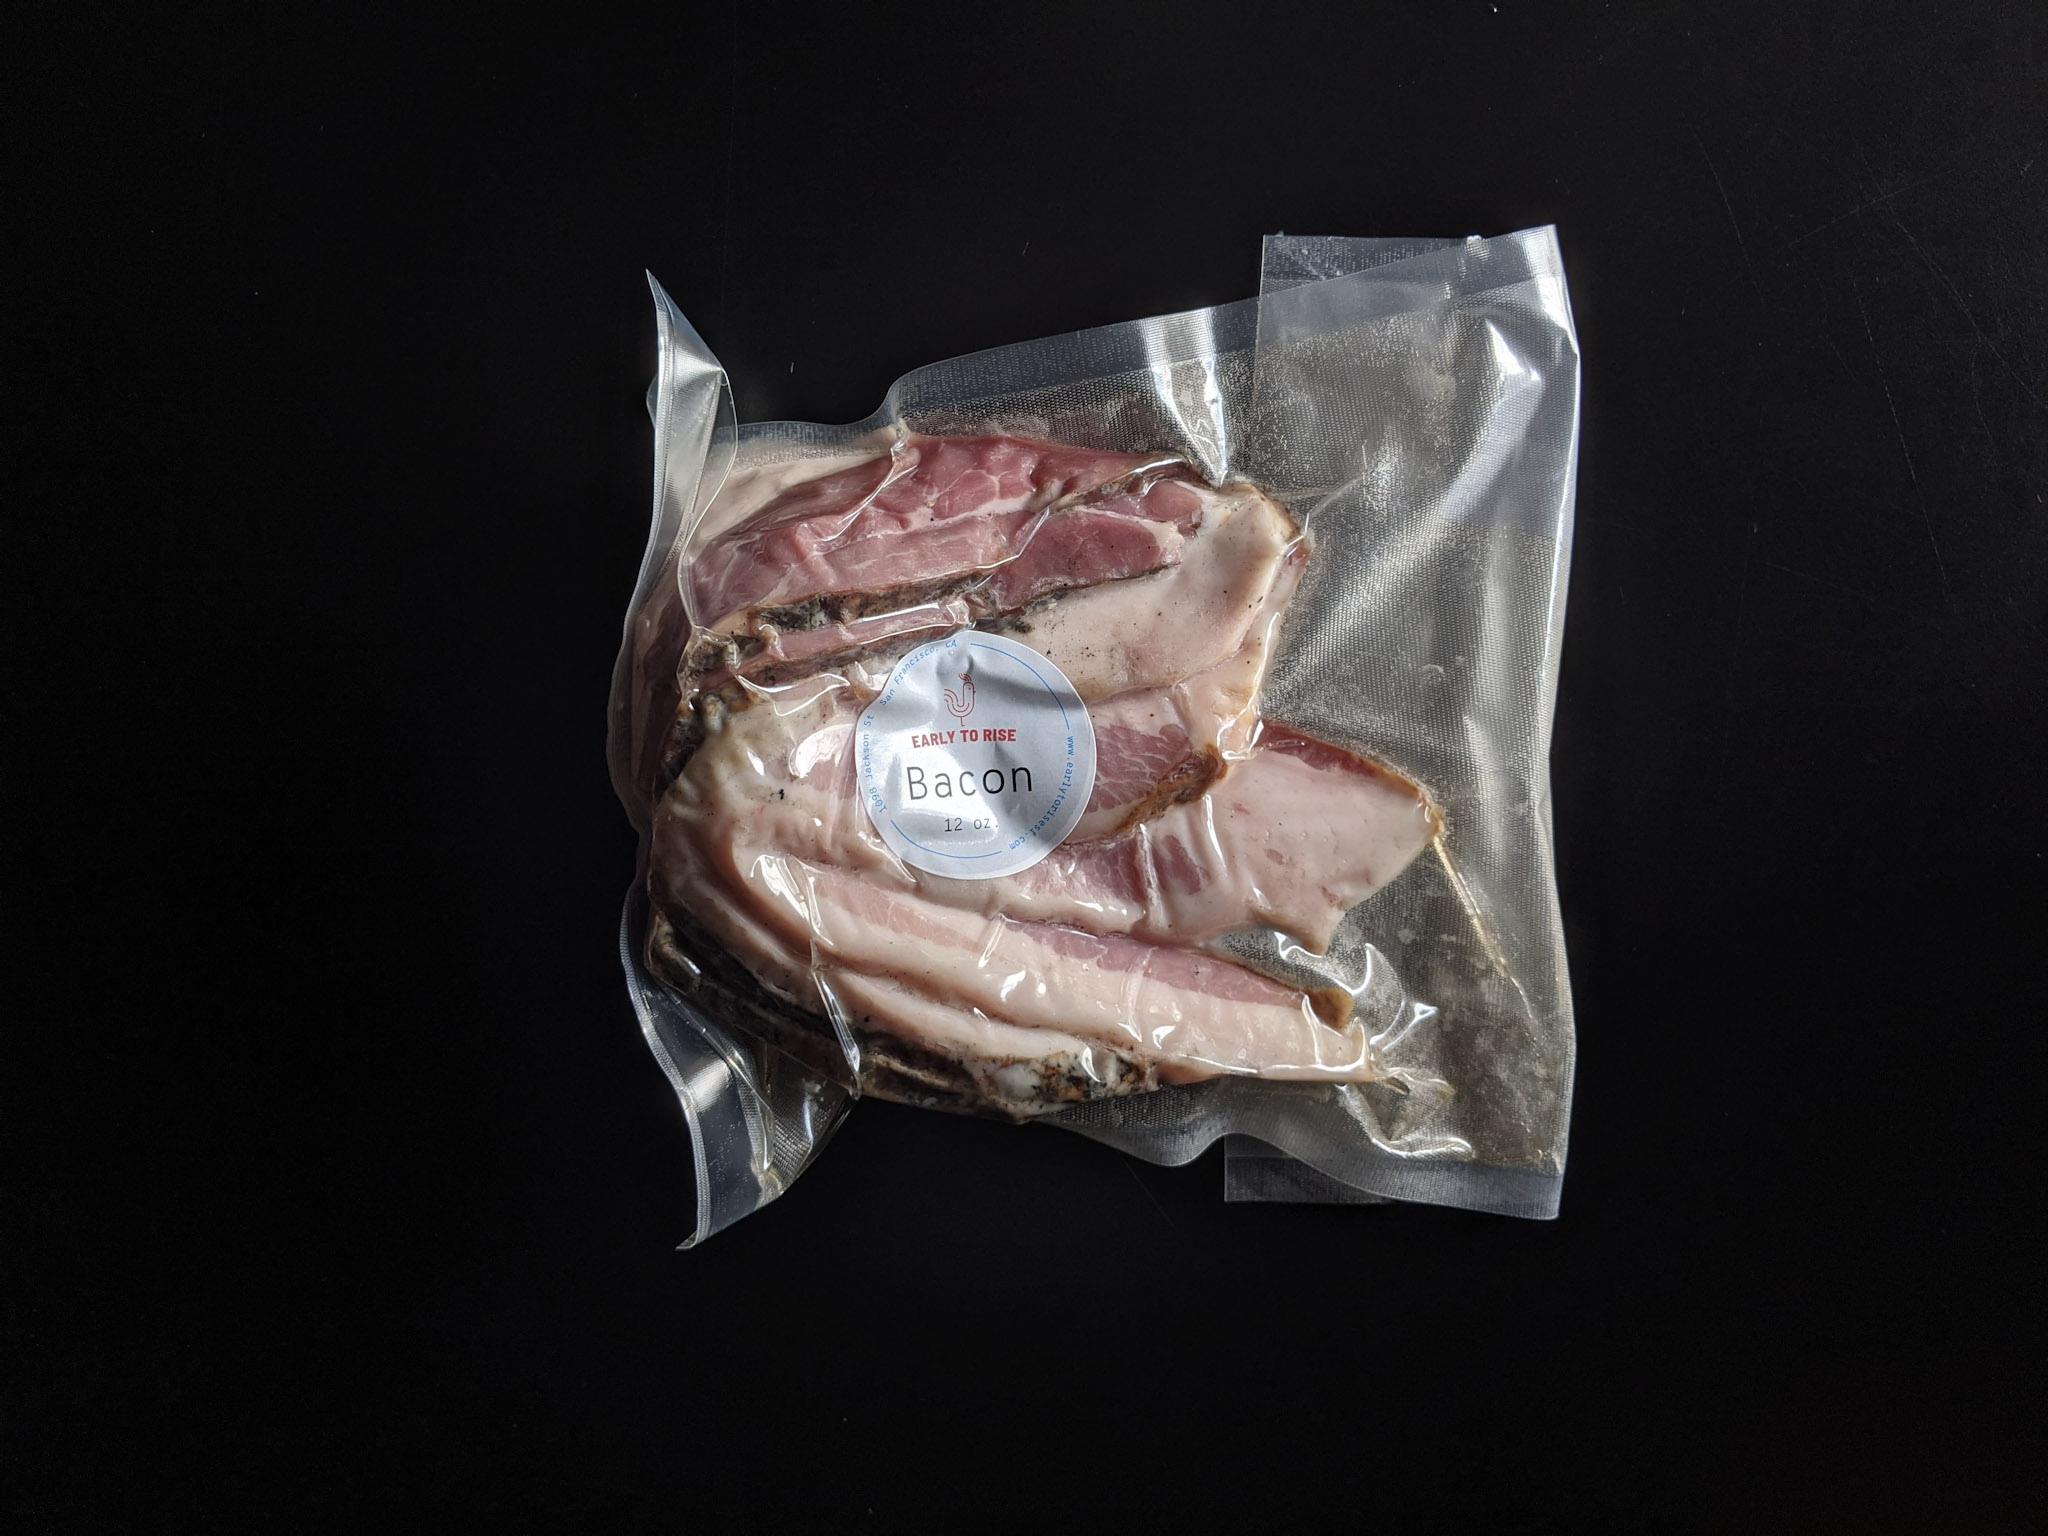 Bacon made from smoked pork bellies went into many of Early to Rise's meals.